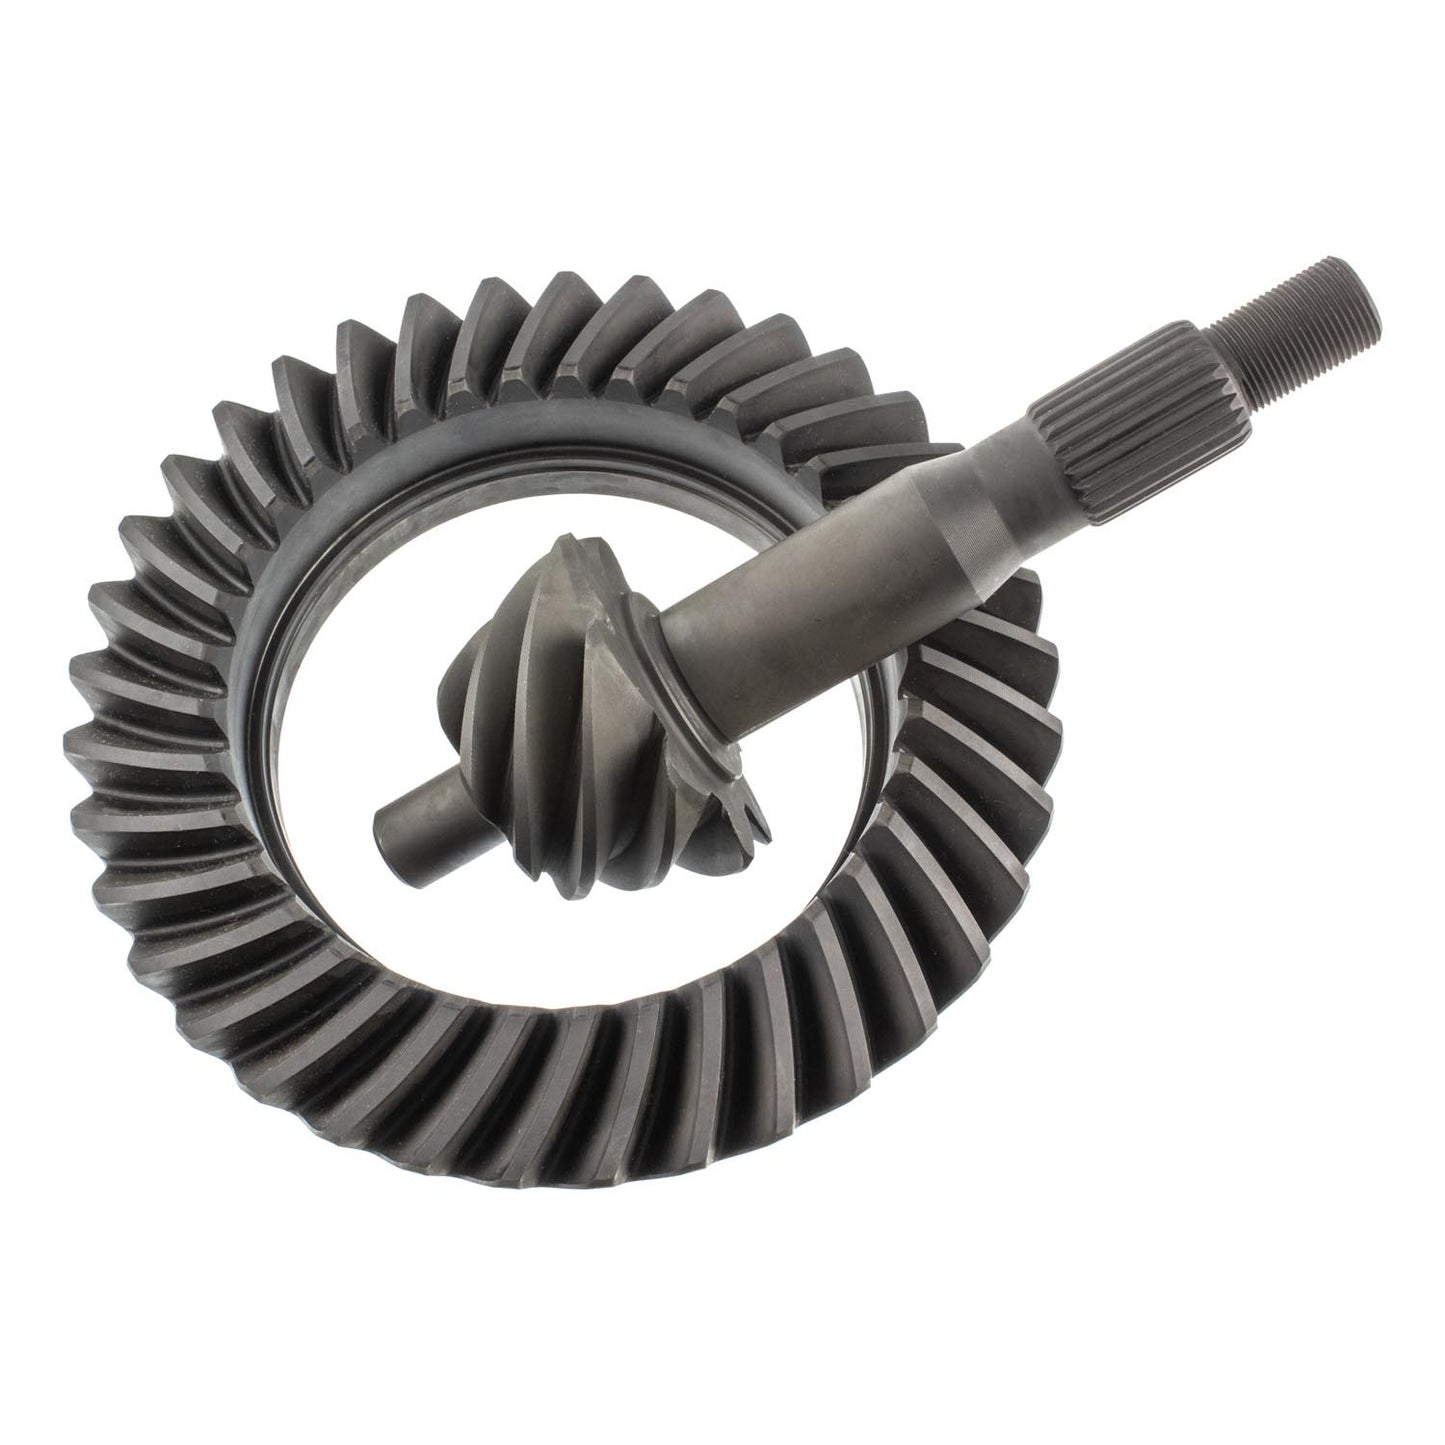 Ring and Pinion - 4.62 Ratio - 25 Spline Pinion - Ford 8 in - Kit